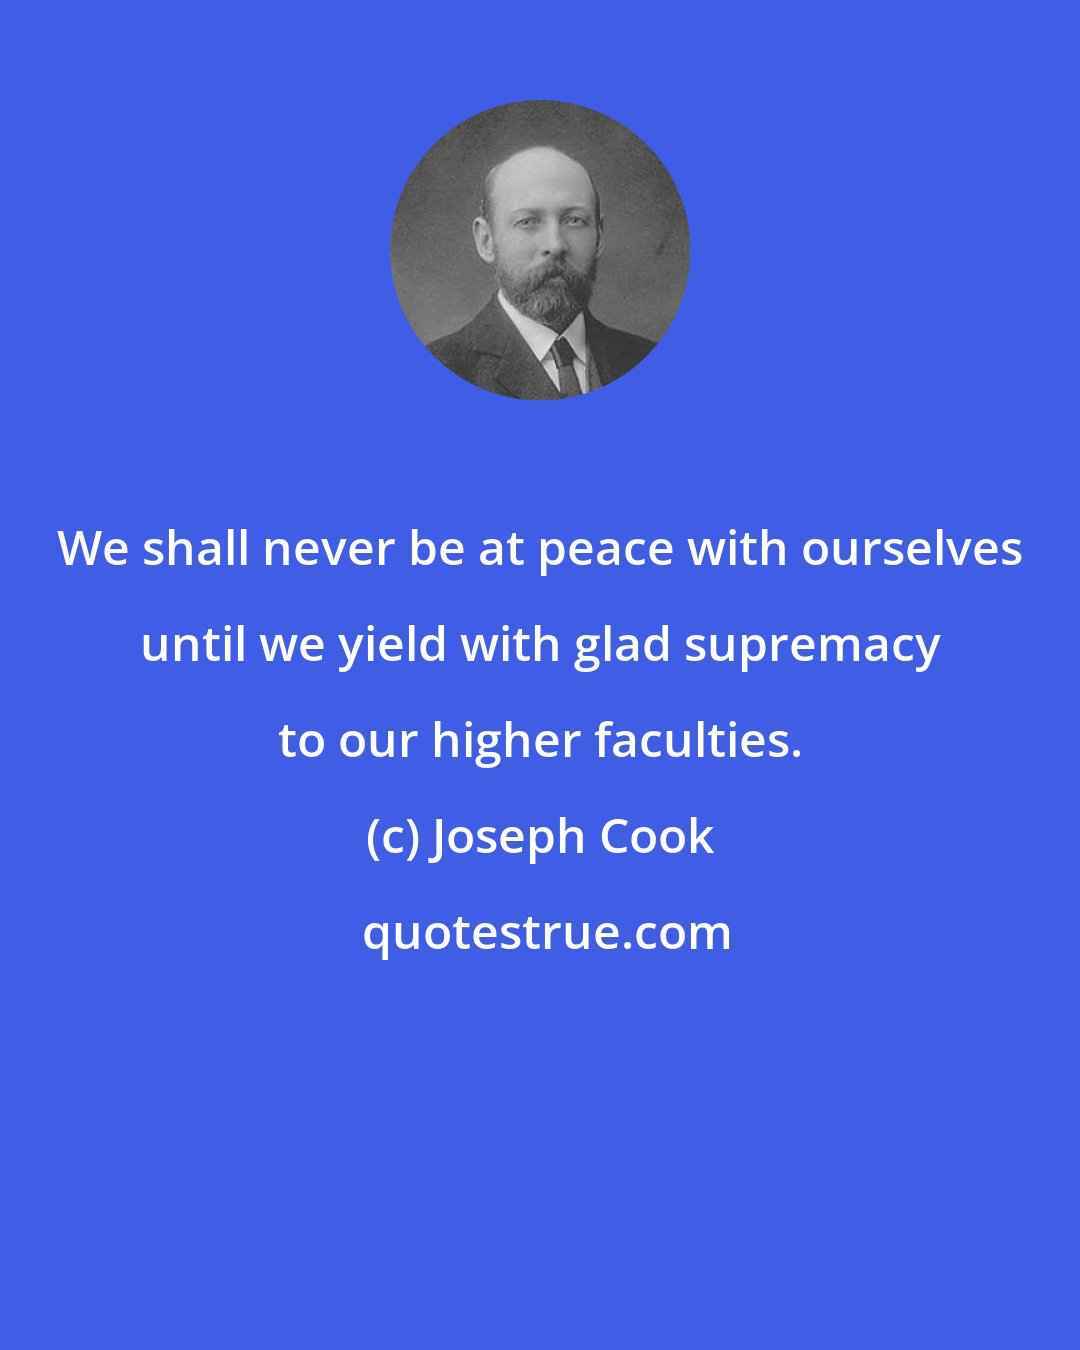 Joseph Cook: We shall never be at peace with ourselves until we yield with glad supremacy to our higher faculties.